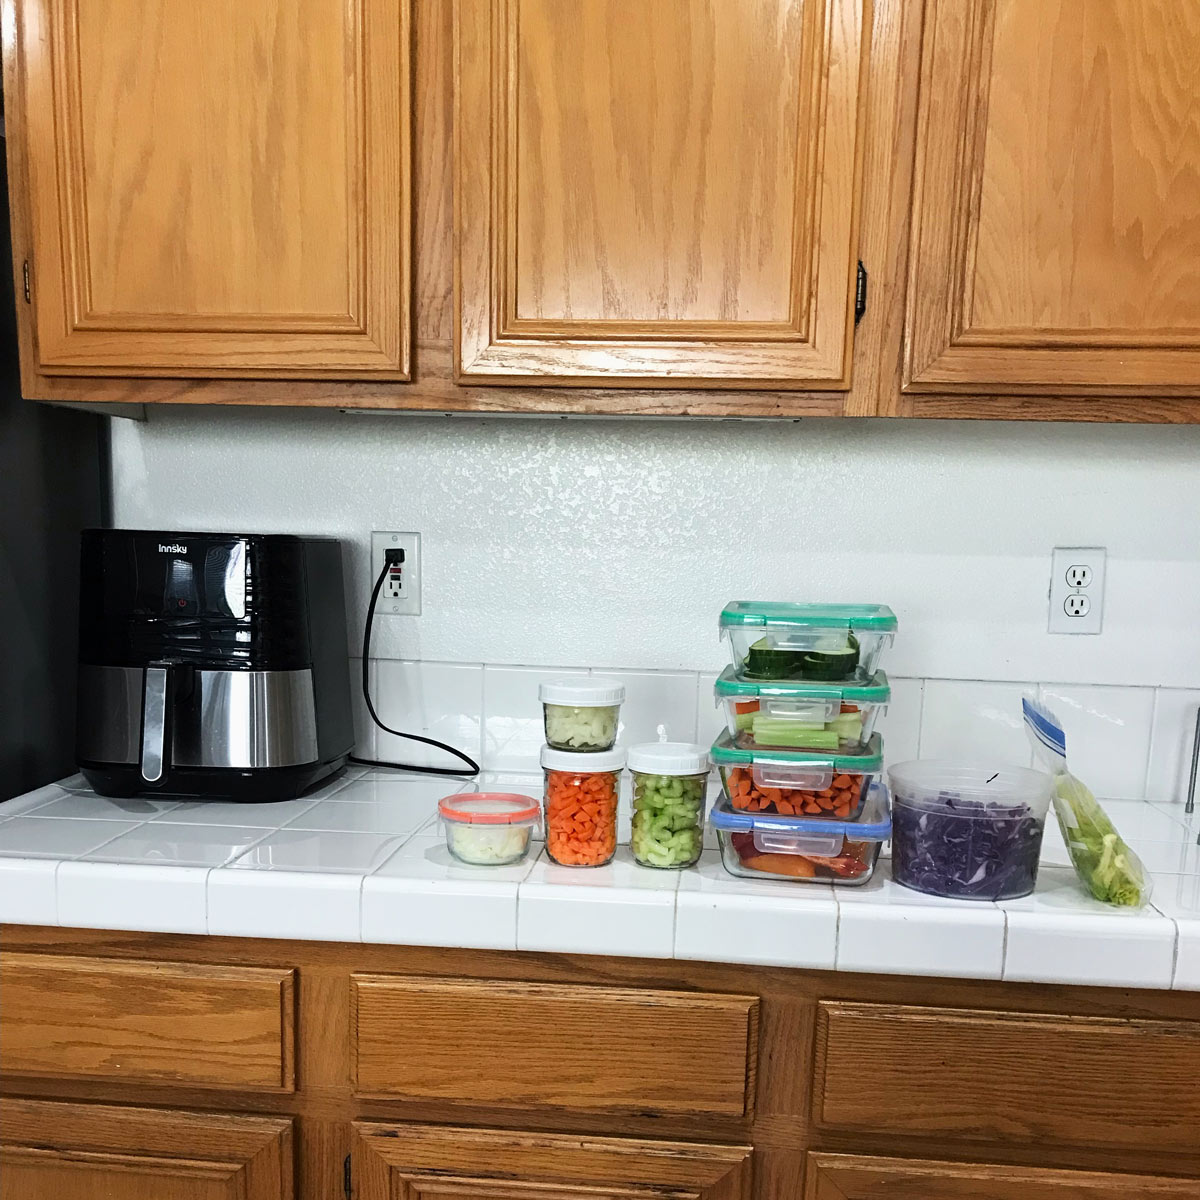 view of kitchen counter with air fryer and prepped veg in containers.